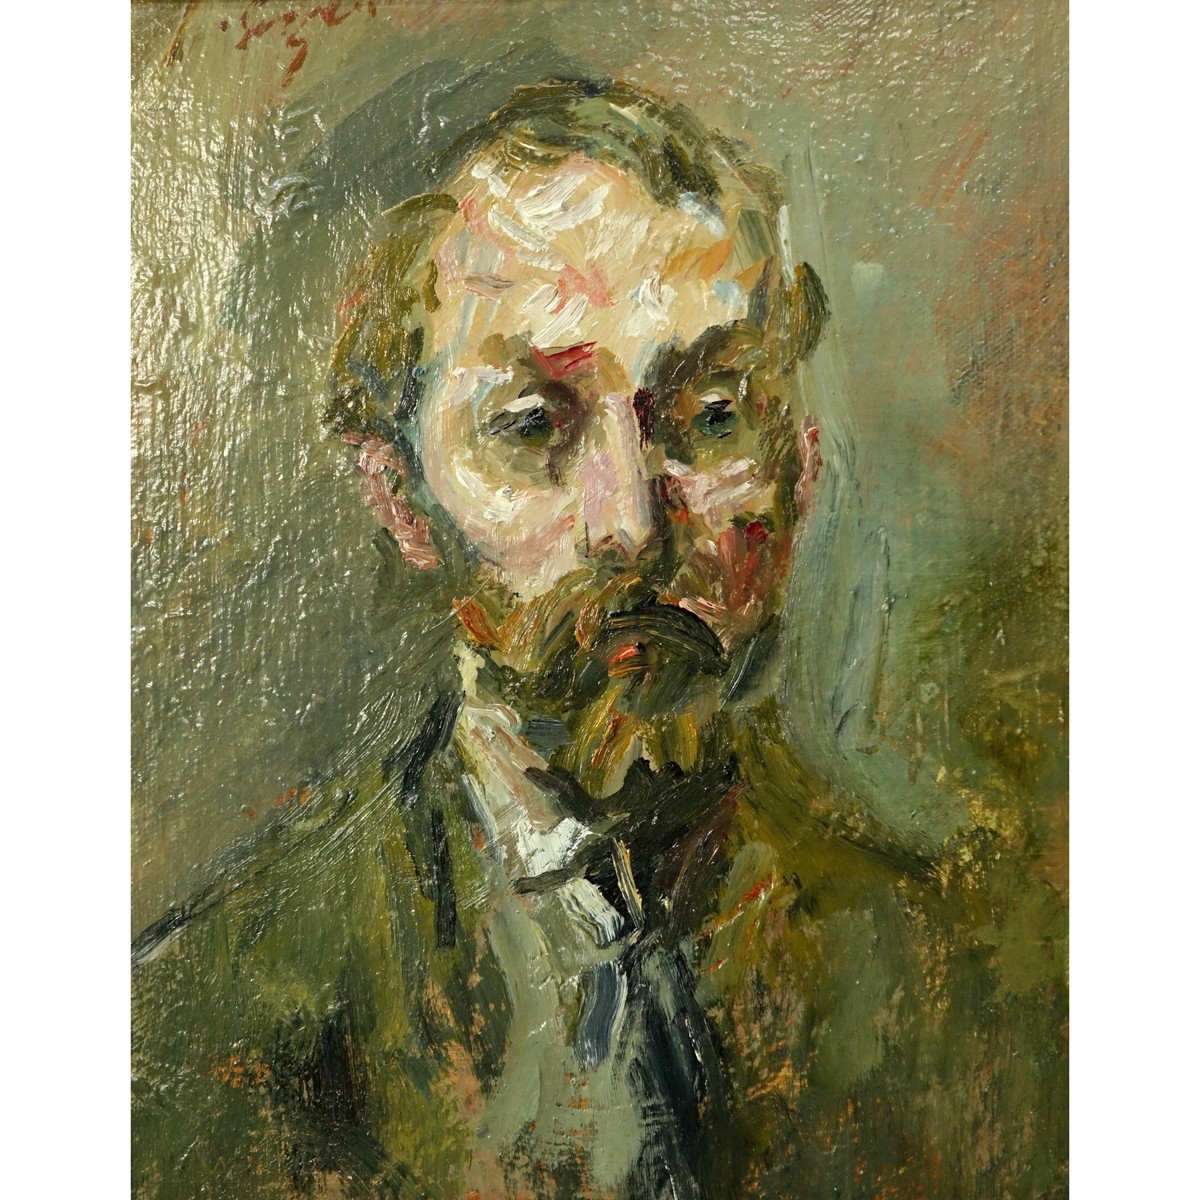 Impressionist School Oil On Canvas Laid On Board "Portrait". Indistinctly signed upper left.